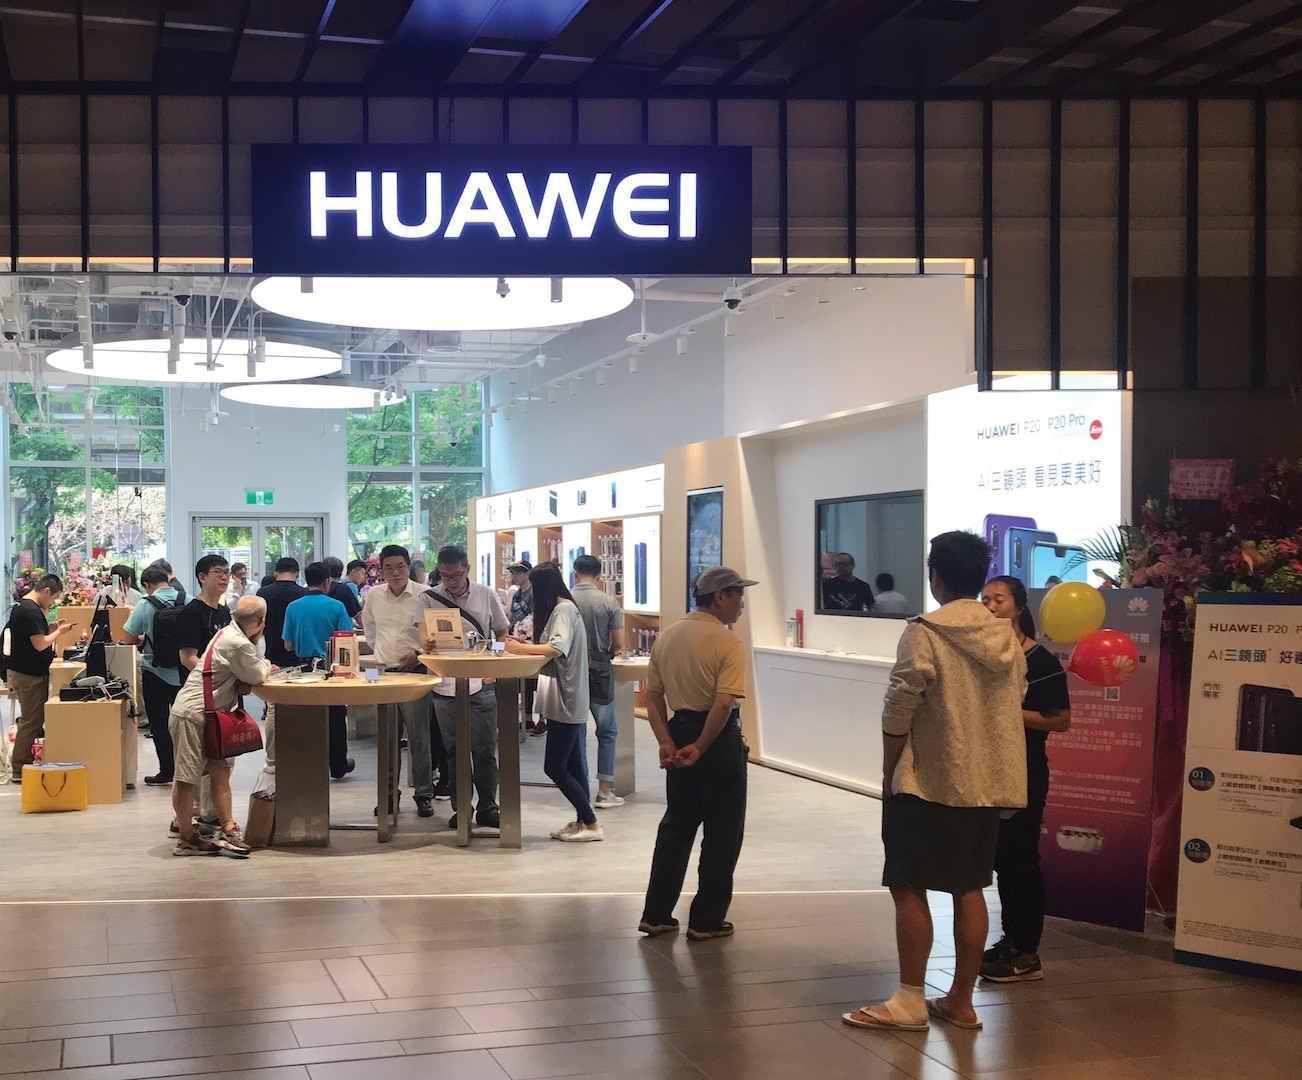 The Chinese company Huawei is establishing a dominant position in the global 5G marketplace despite concerns over security and its ties to the Chinese government. (